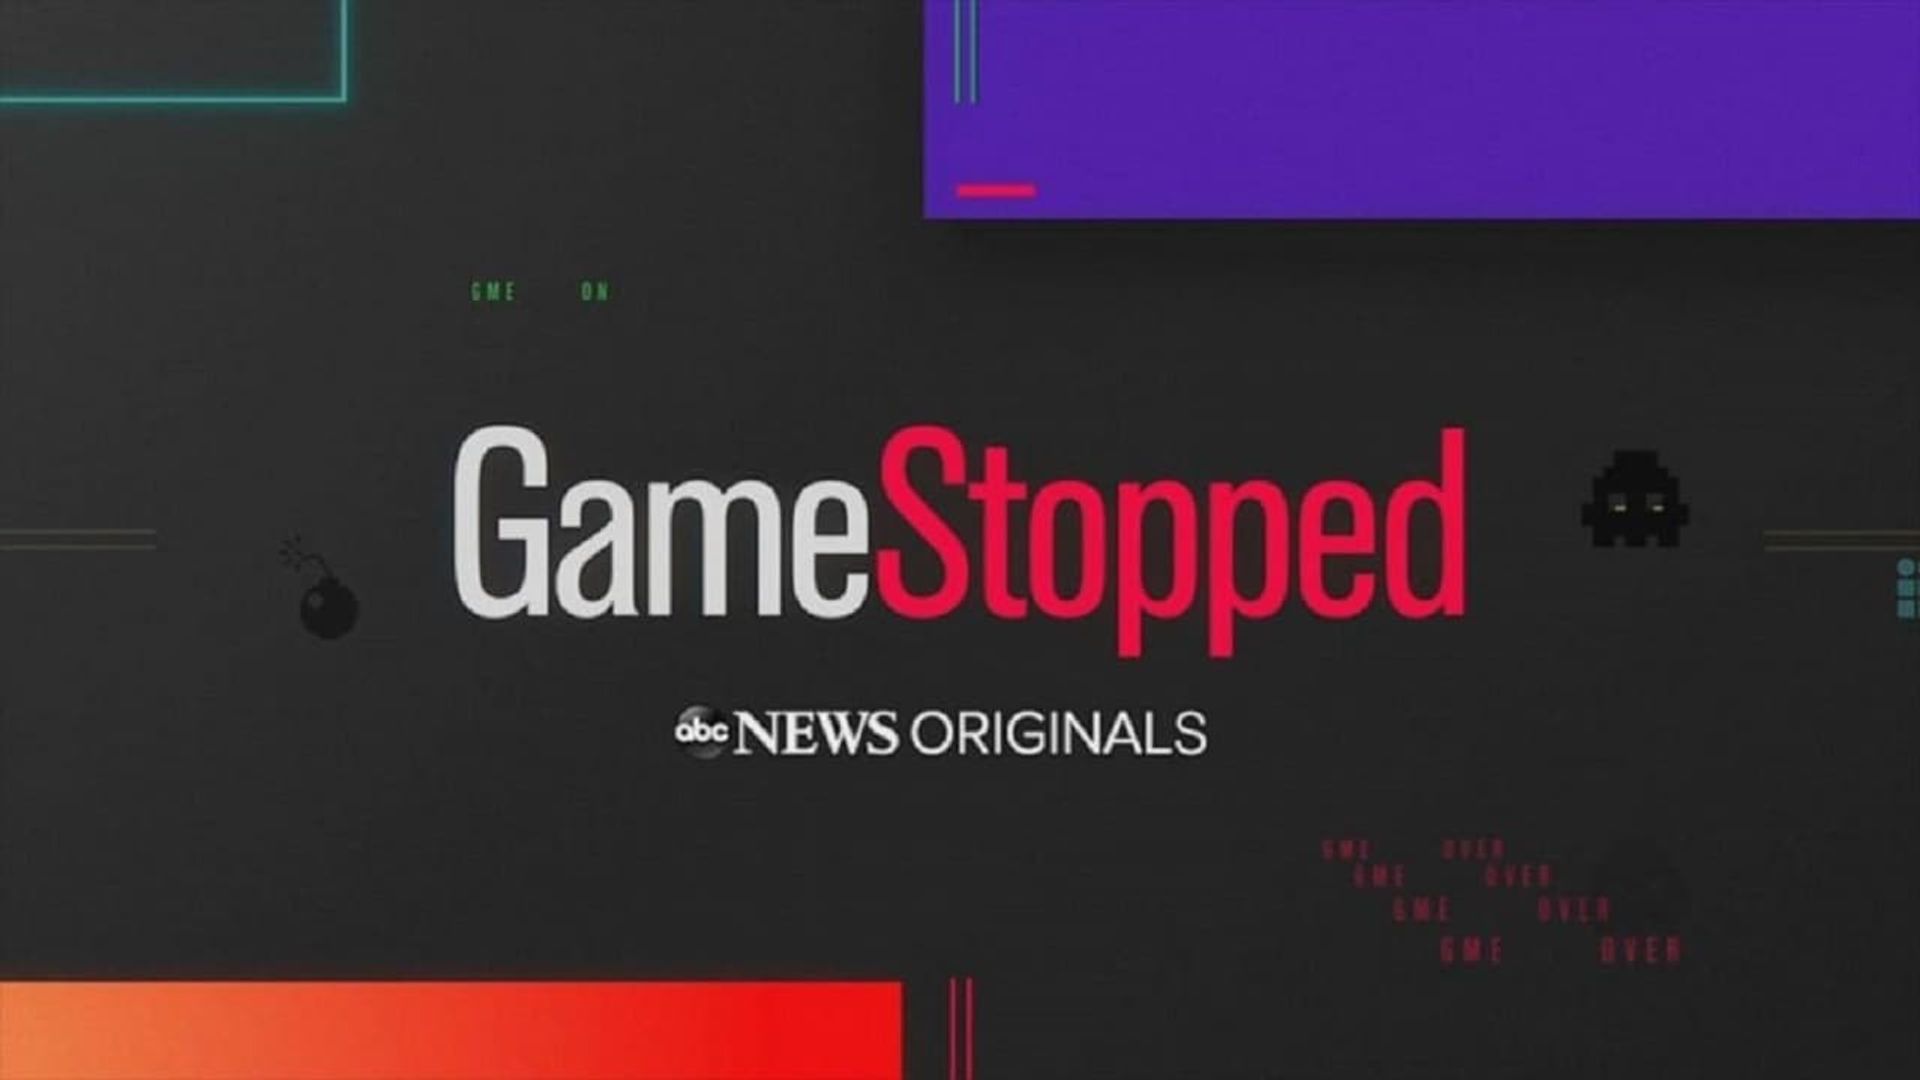 GameStopped background